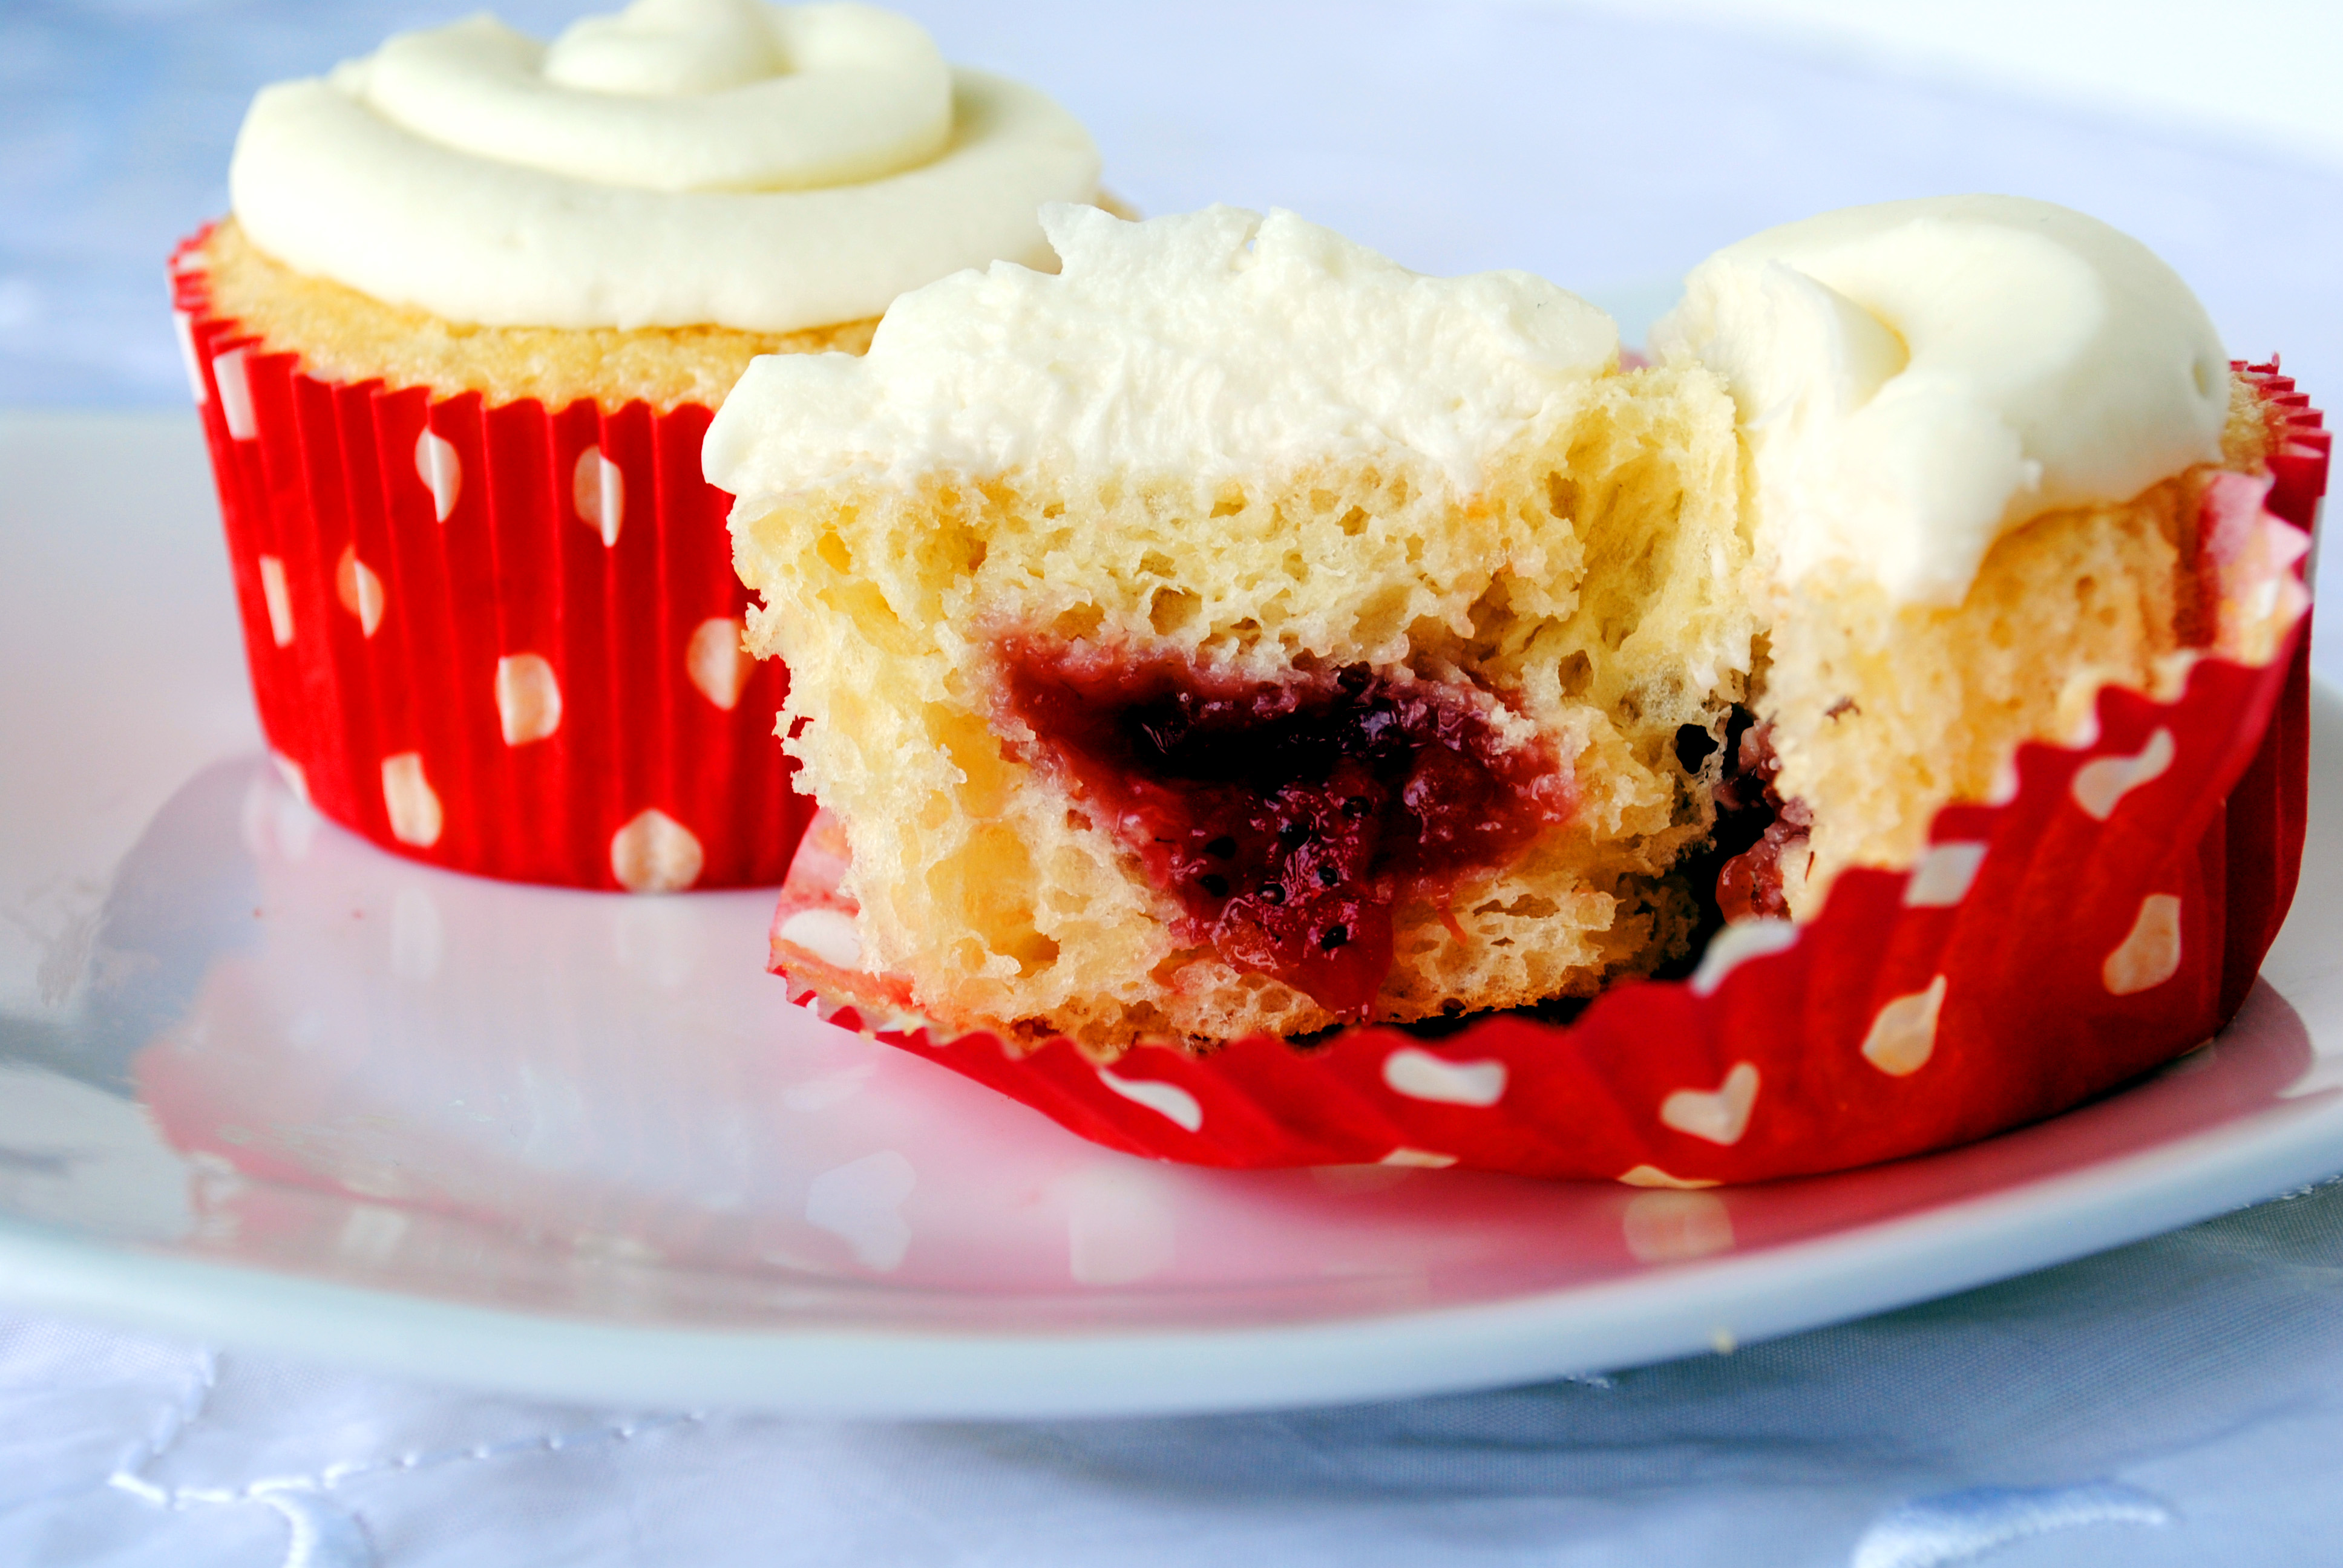 Strawberry Cupcakes with Filling Inside Recipe